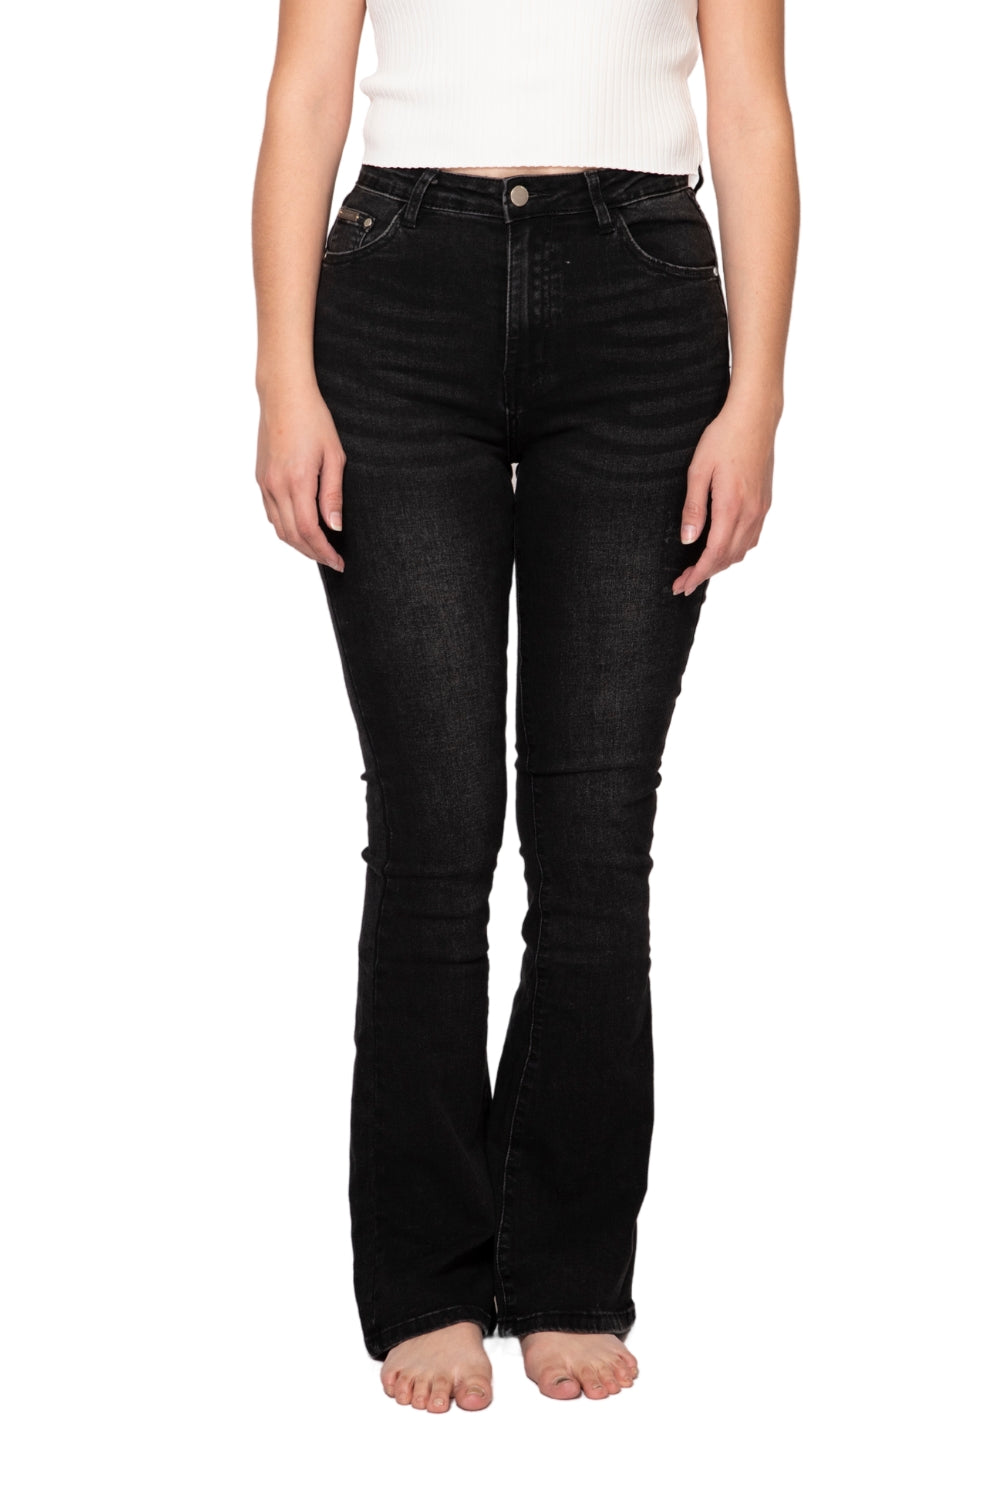 JEANS FLARE NEGRO